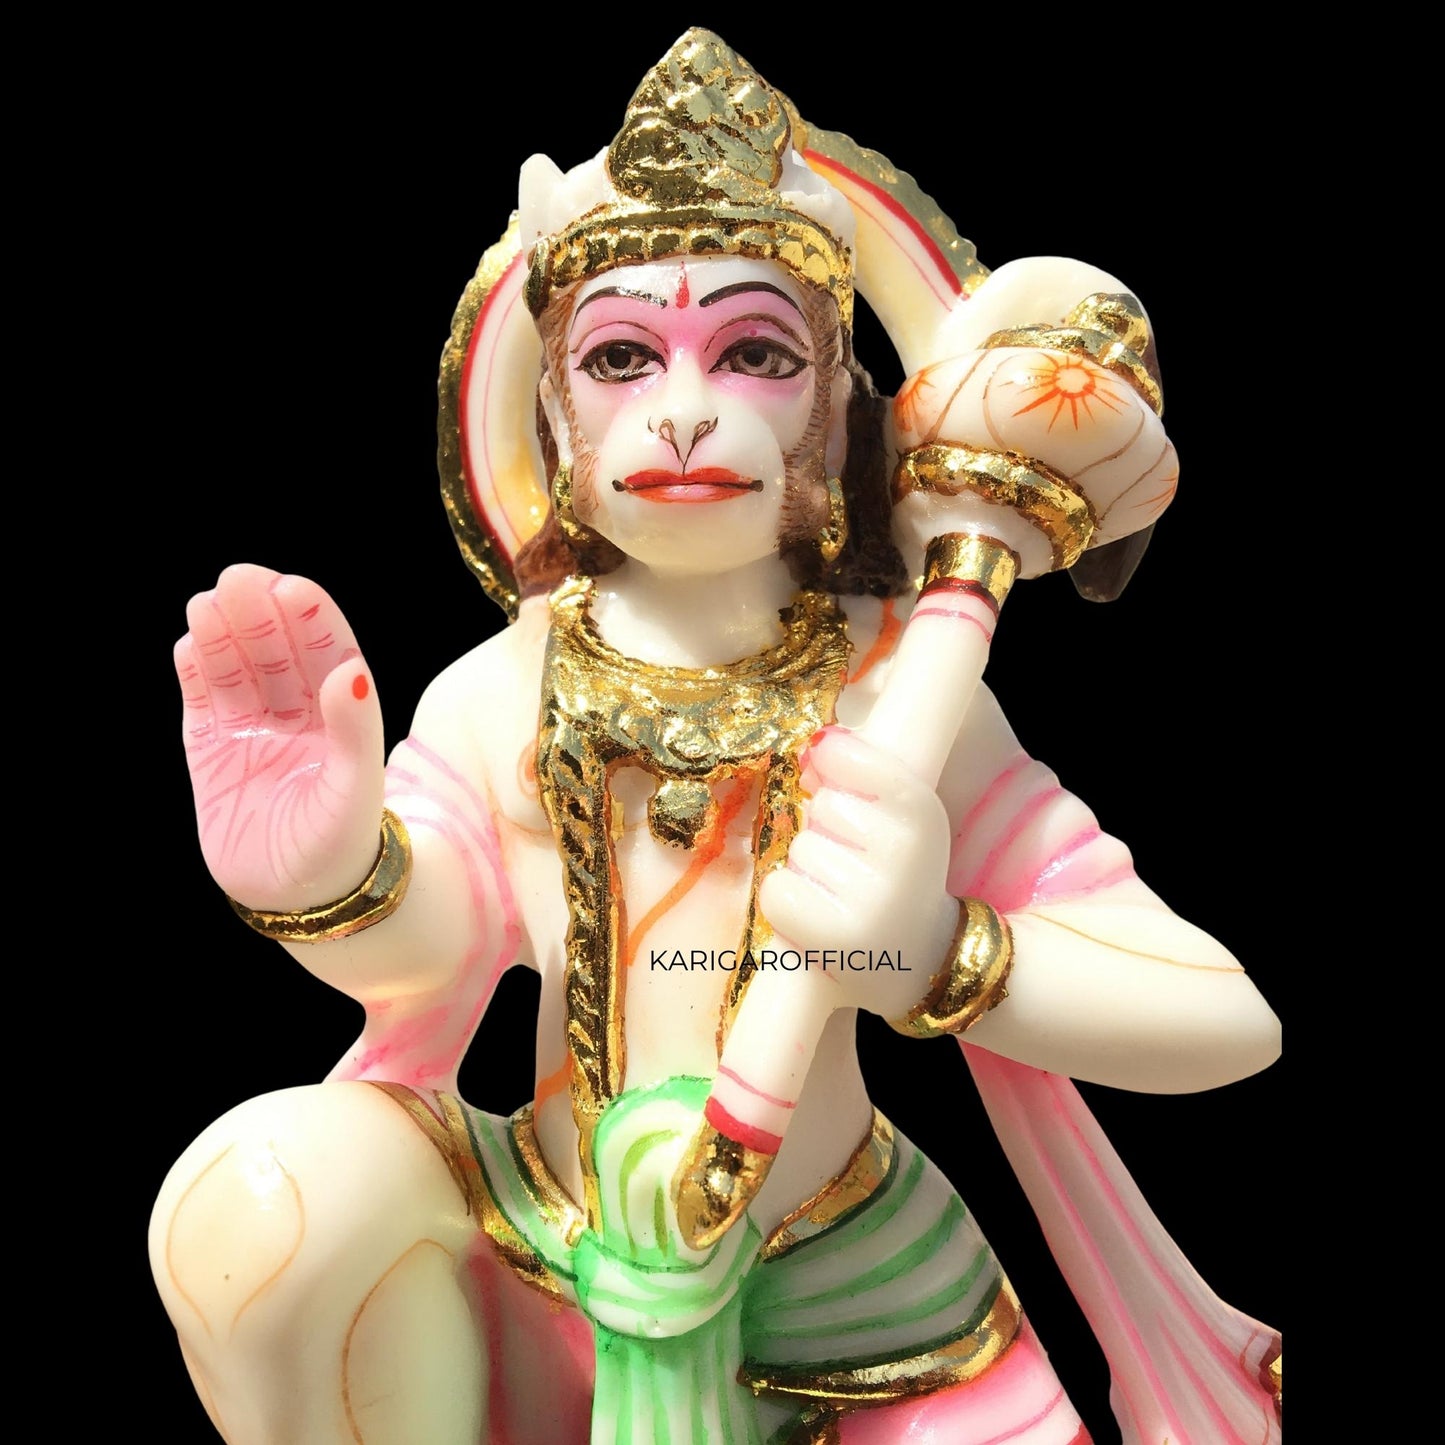 Hanuman Statue, Multicolor 8 inches Hand Painted Marble Blessing Bajrang Bali Figurine, Natural Powerlifter Hindu Monkey god of Devotion, Strength, Bhakti, Perfect for Small Home Temple Decoration